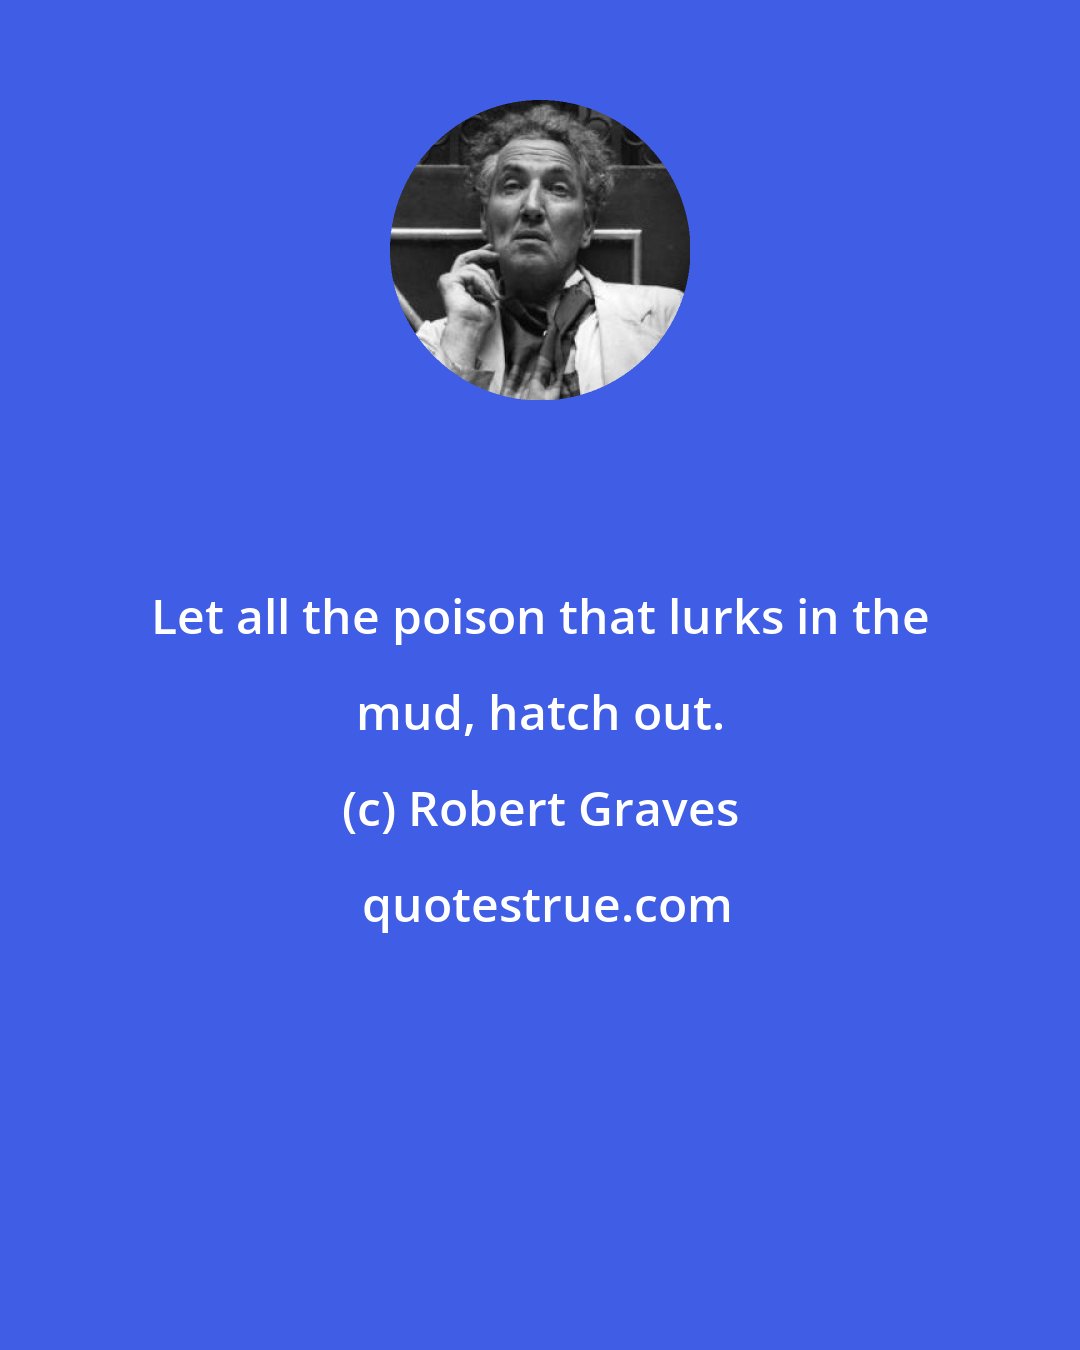 Robert Graves: Let all the poison that lurks in the mud, hatch out.